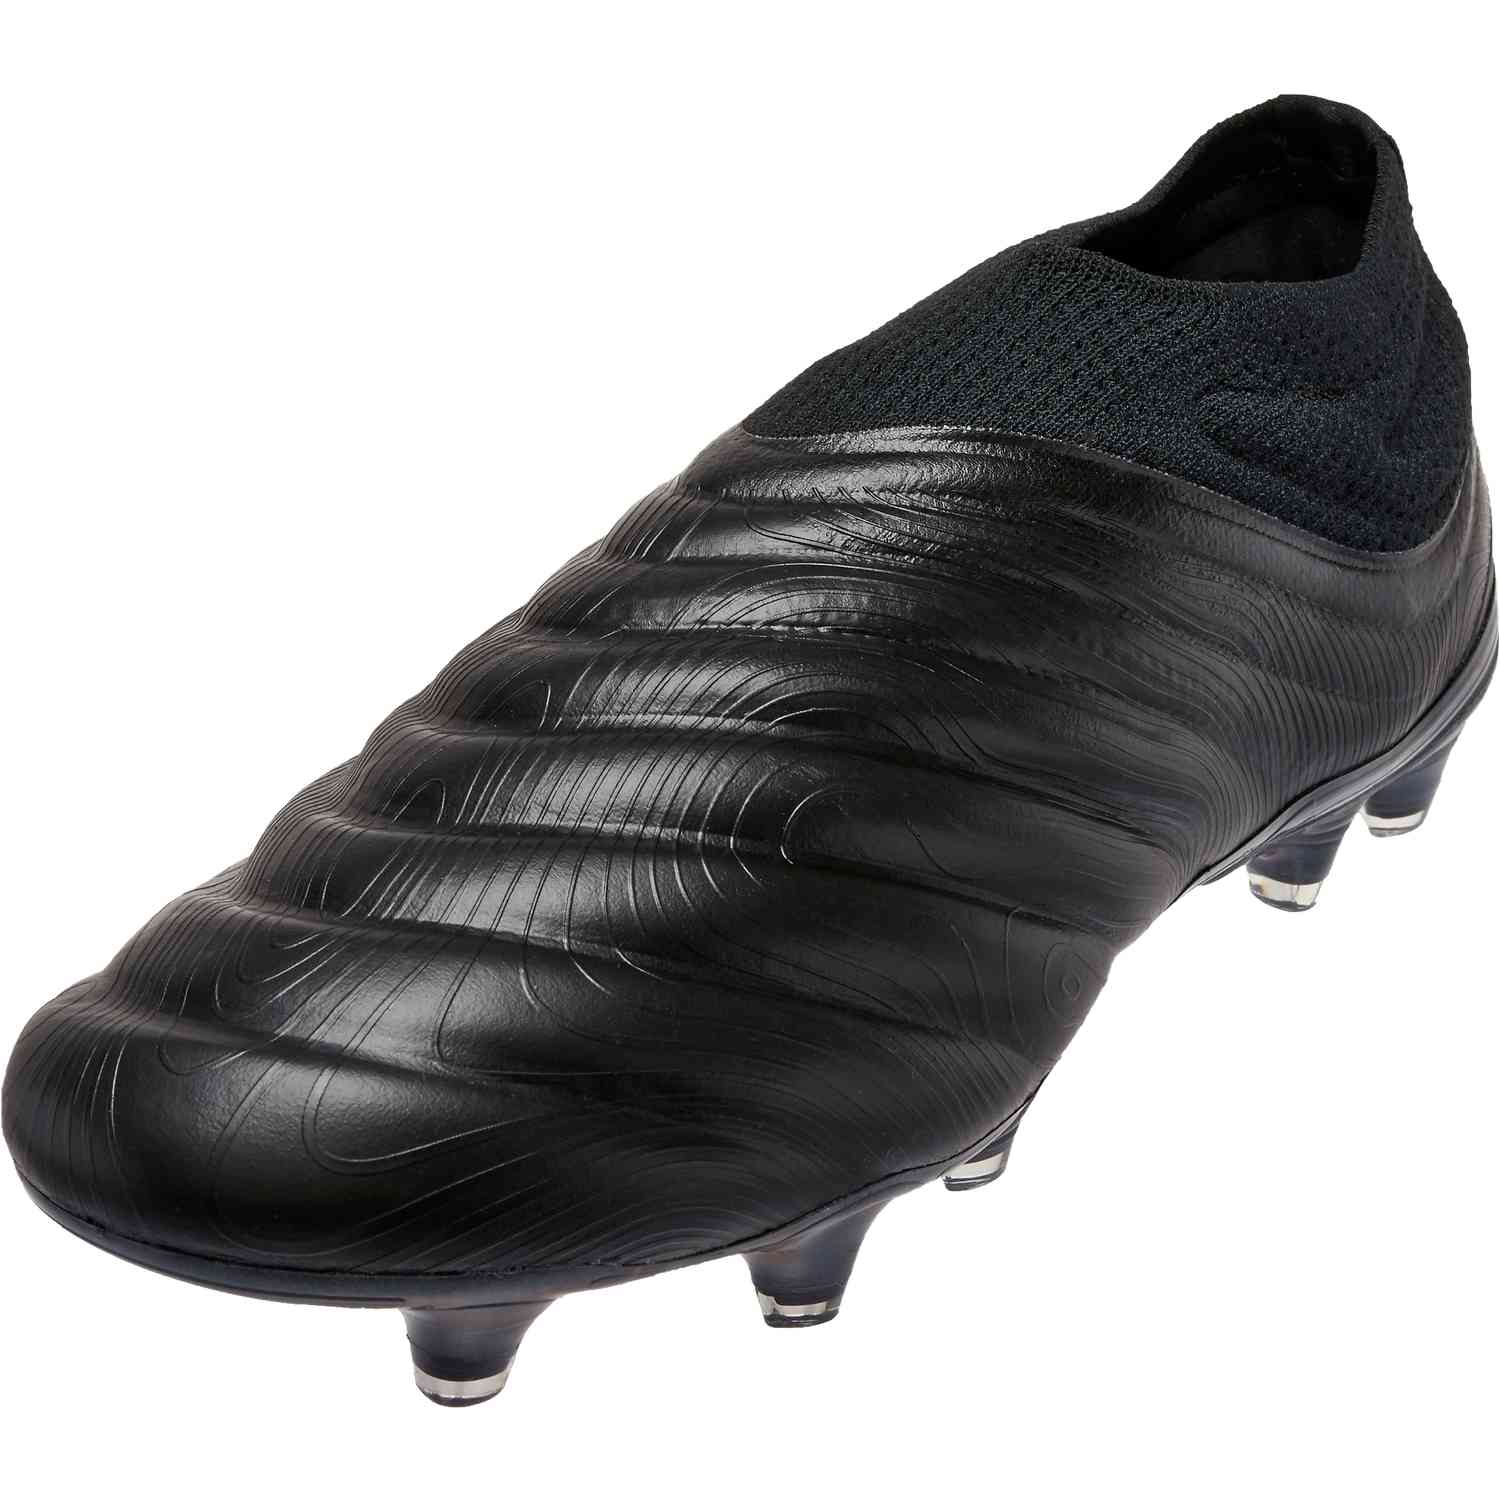 adidas soccer shoes copa